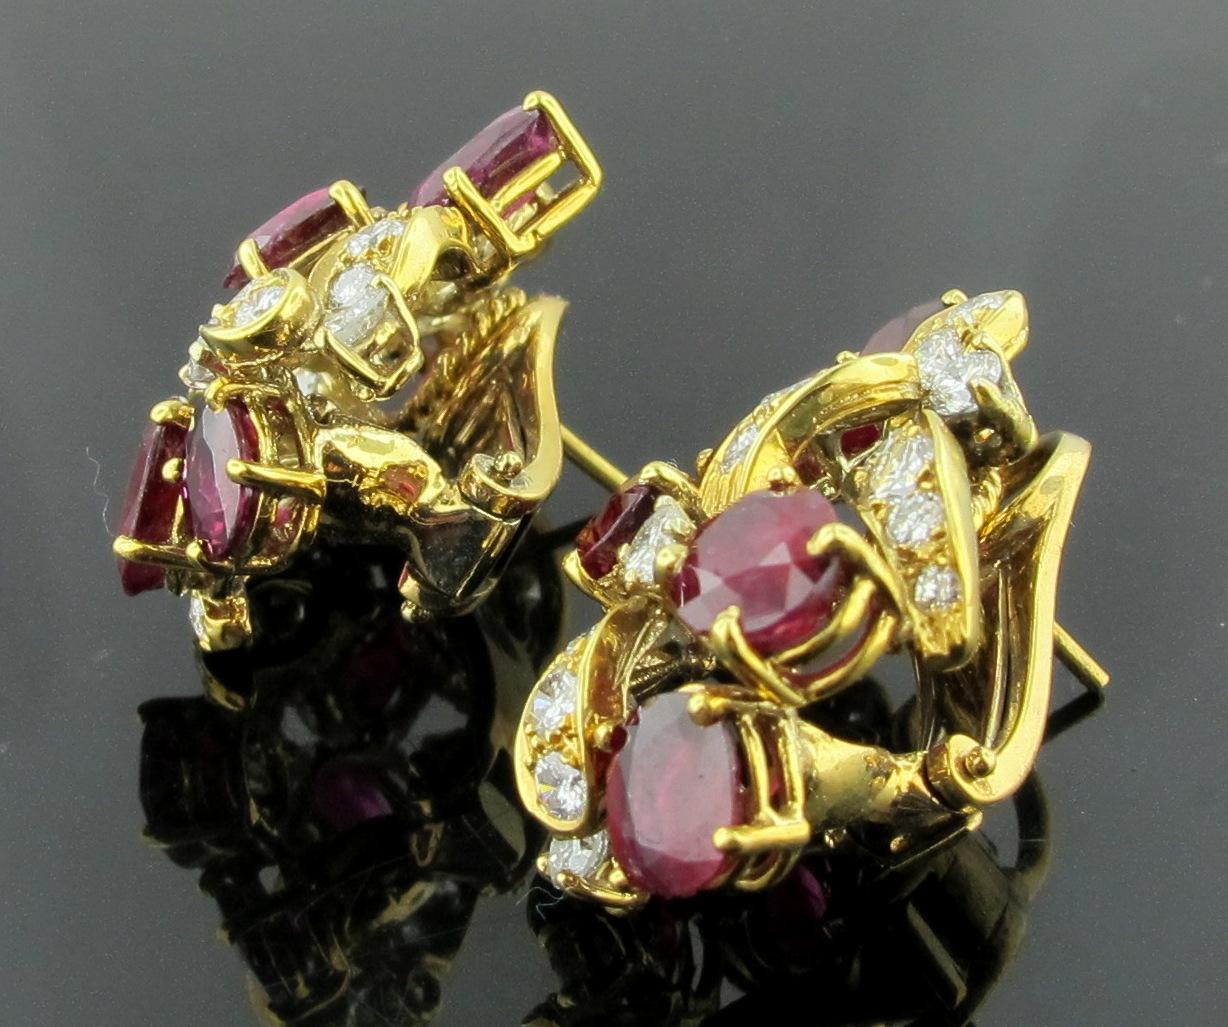 12 Oval Rubies, weighing 12 carats, with 42 round brilliant cut diamonds interwoven between the Rubies, with a total weight of 3.00 carats, set in 18 karat yellow gold.  